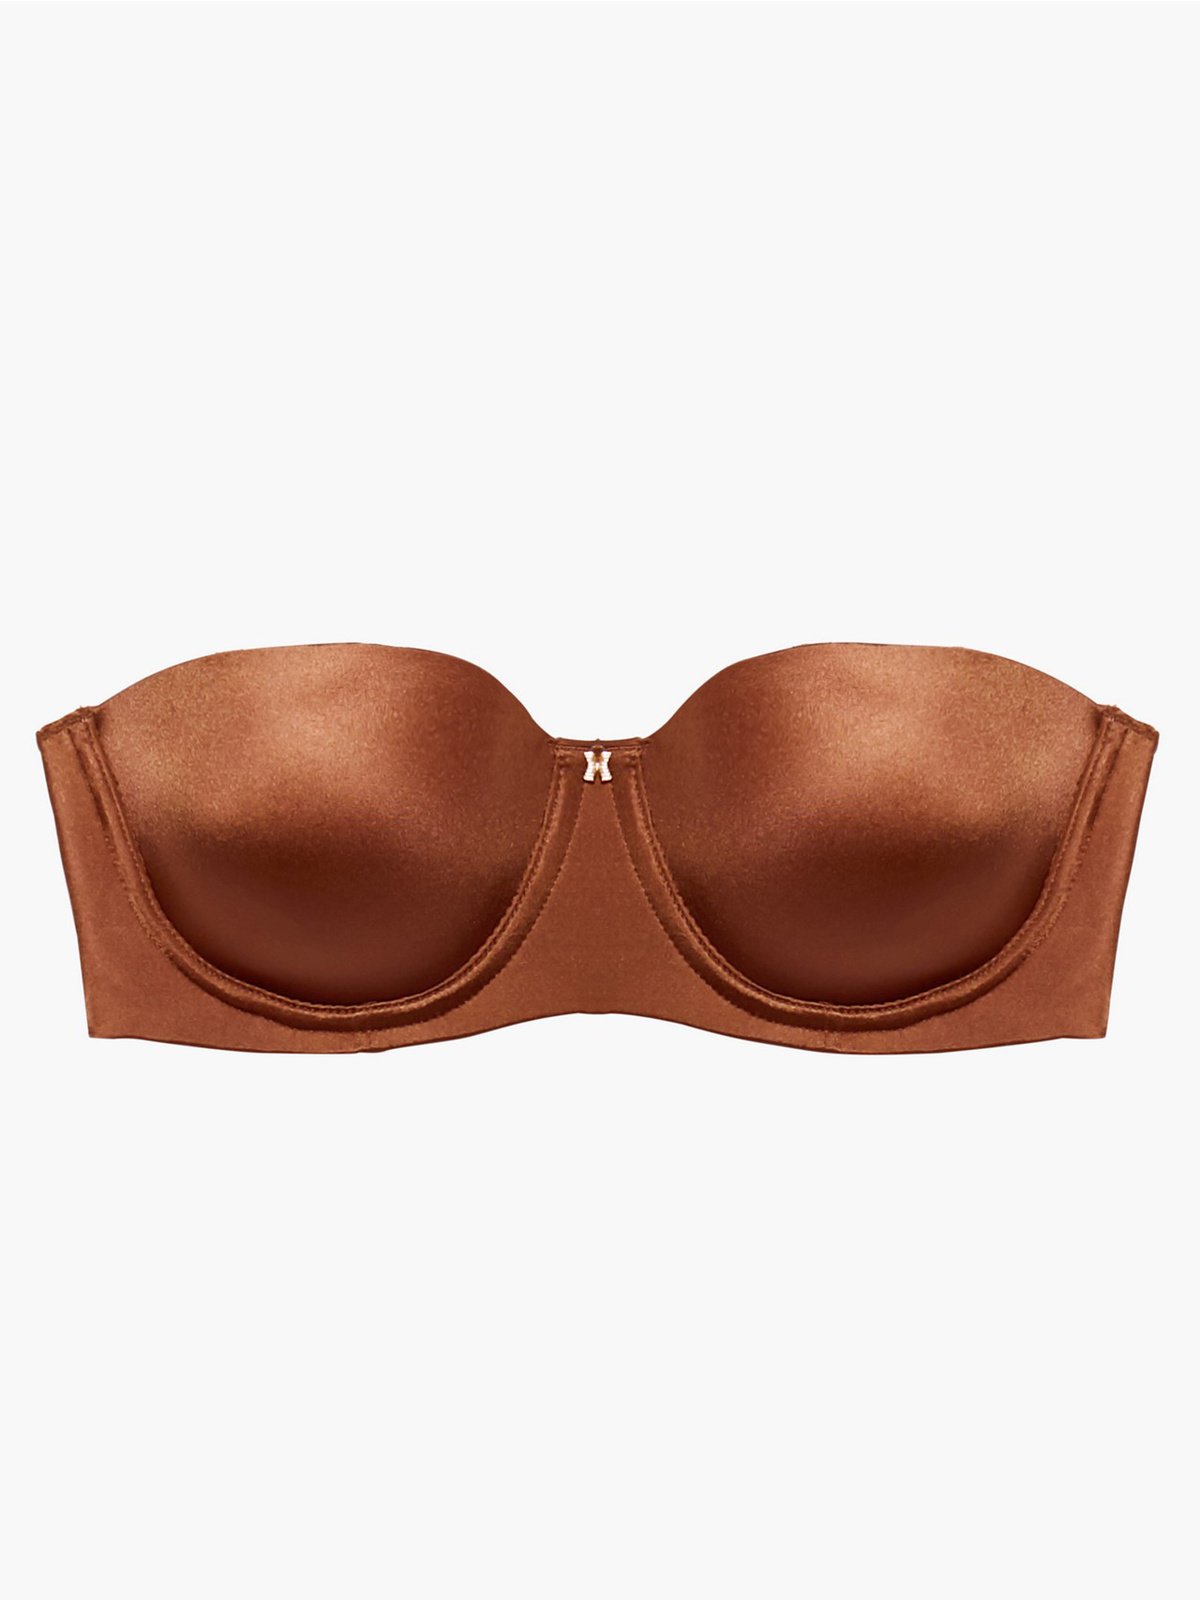 NWT Savage x Fenty Core Microfiber Push-Up Brown Sugar Nude Bra Size 38B -  $27 New With Tags - From Brooklyn